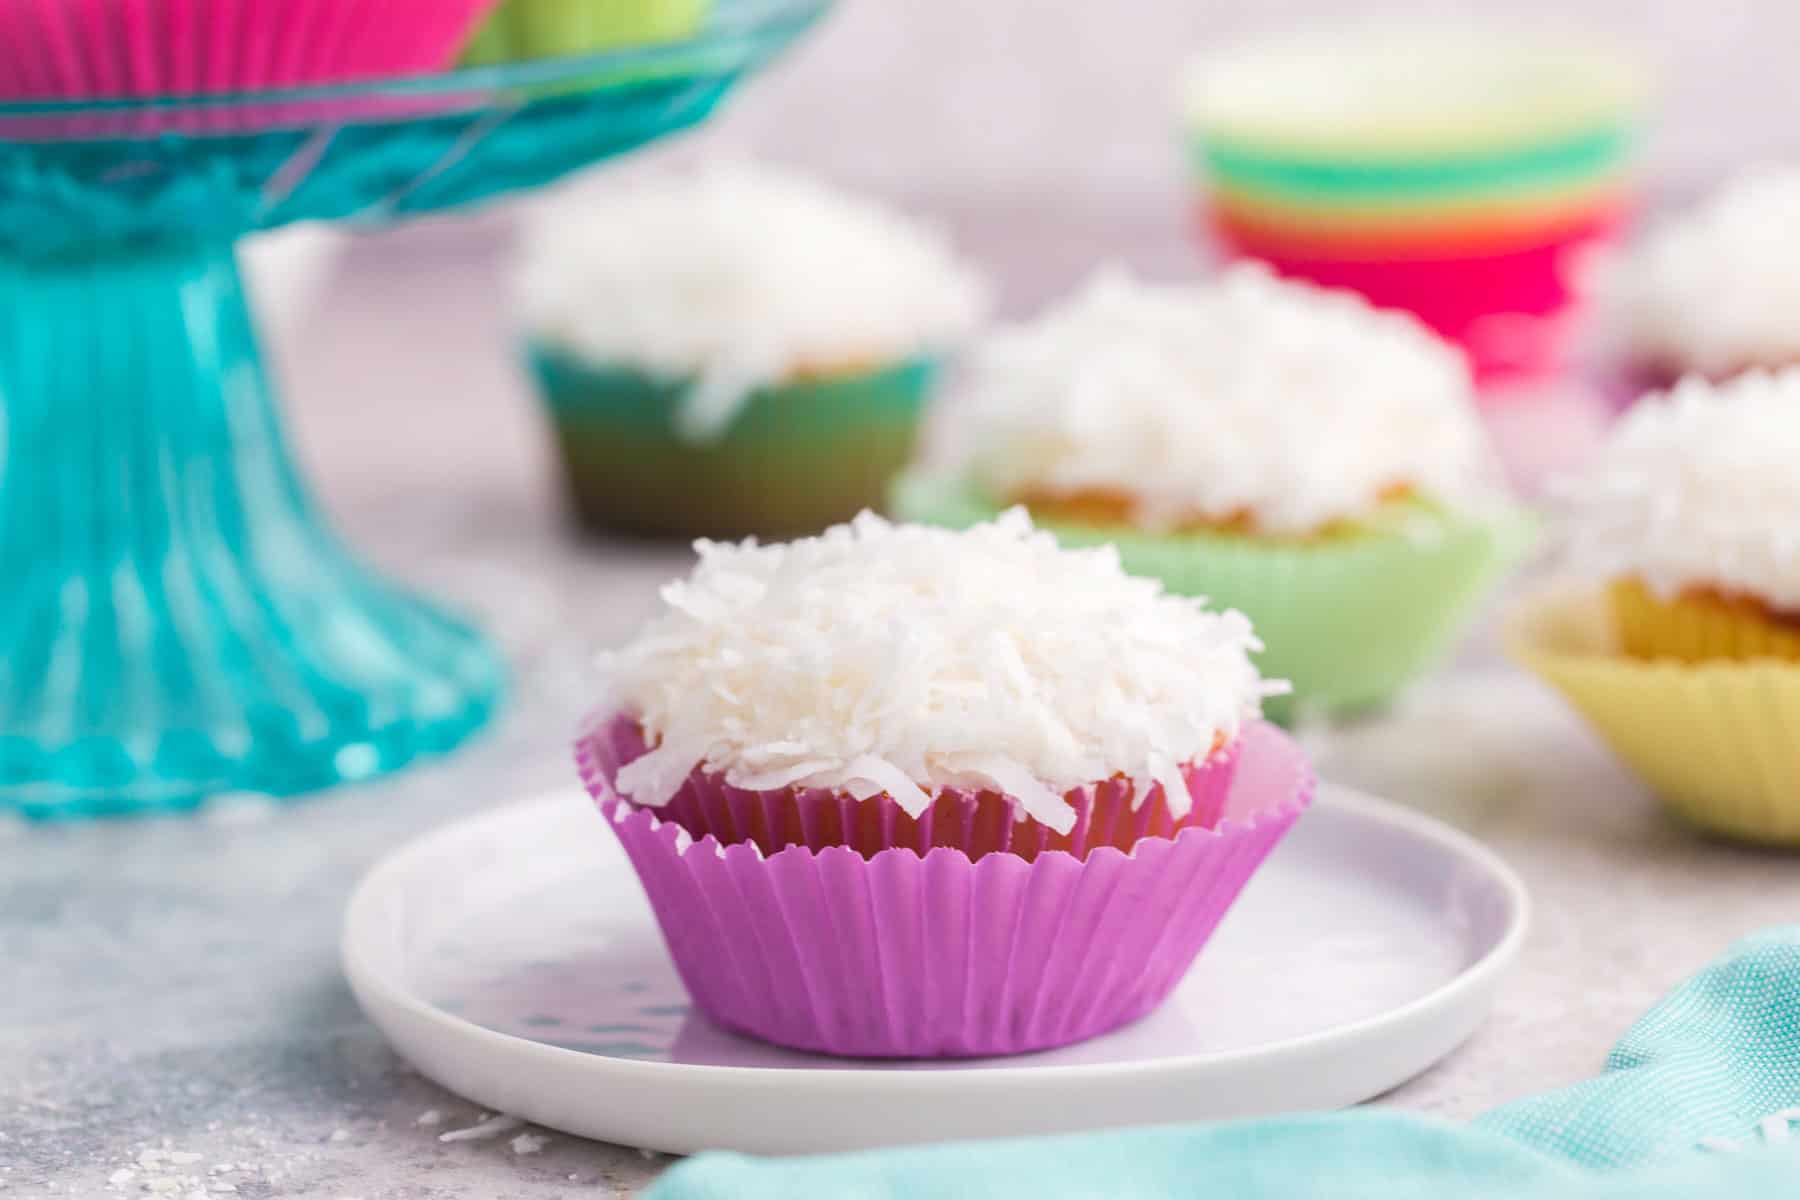 a coconut cupcake in a pink wrapper on a small plate with more cupcakes in the background.